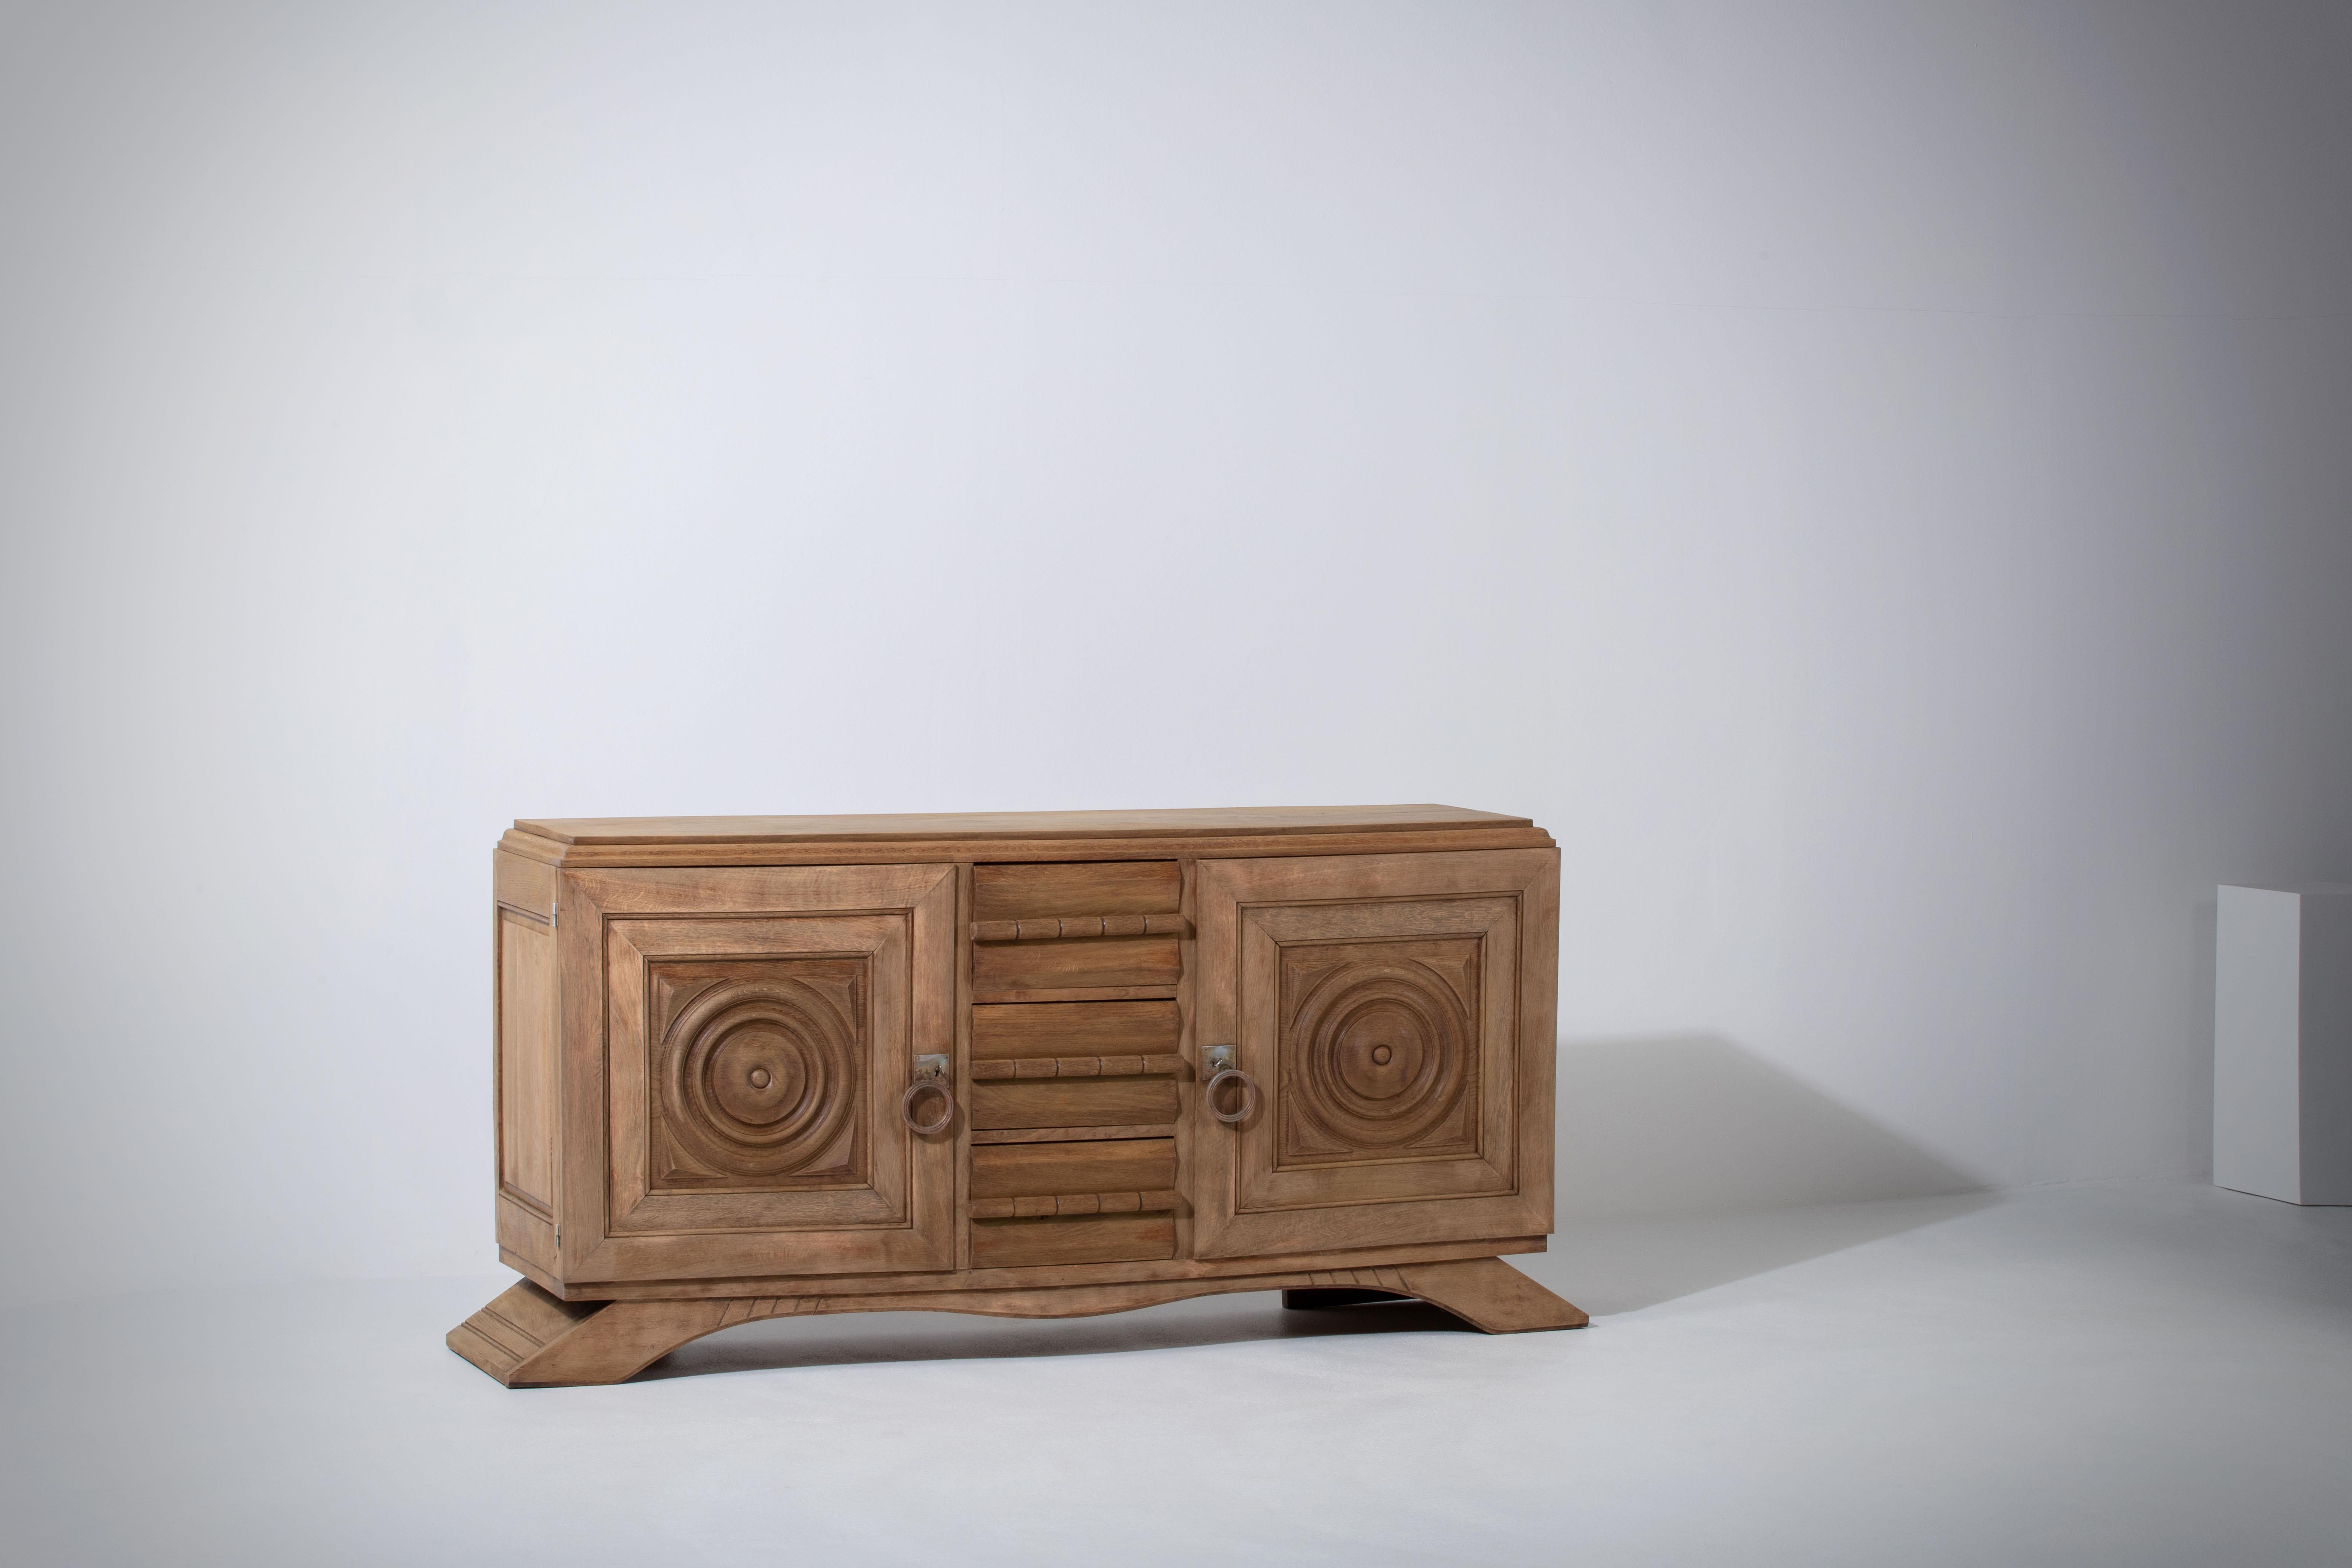 Credenza, solid oak, France, 1940s, attributed to Charles Dudouyt.
Large Art Deco Brutalist sideboard. 
The credenza consists of three central drawers and two storage facilities and covered with very detailed designed door panels. 
The refined